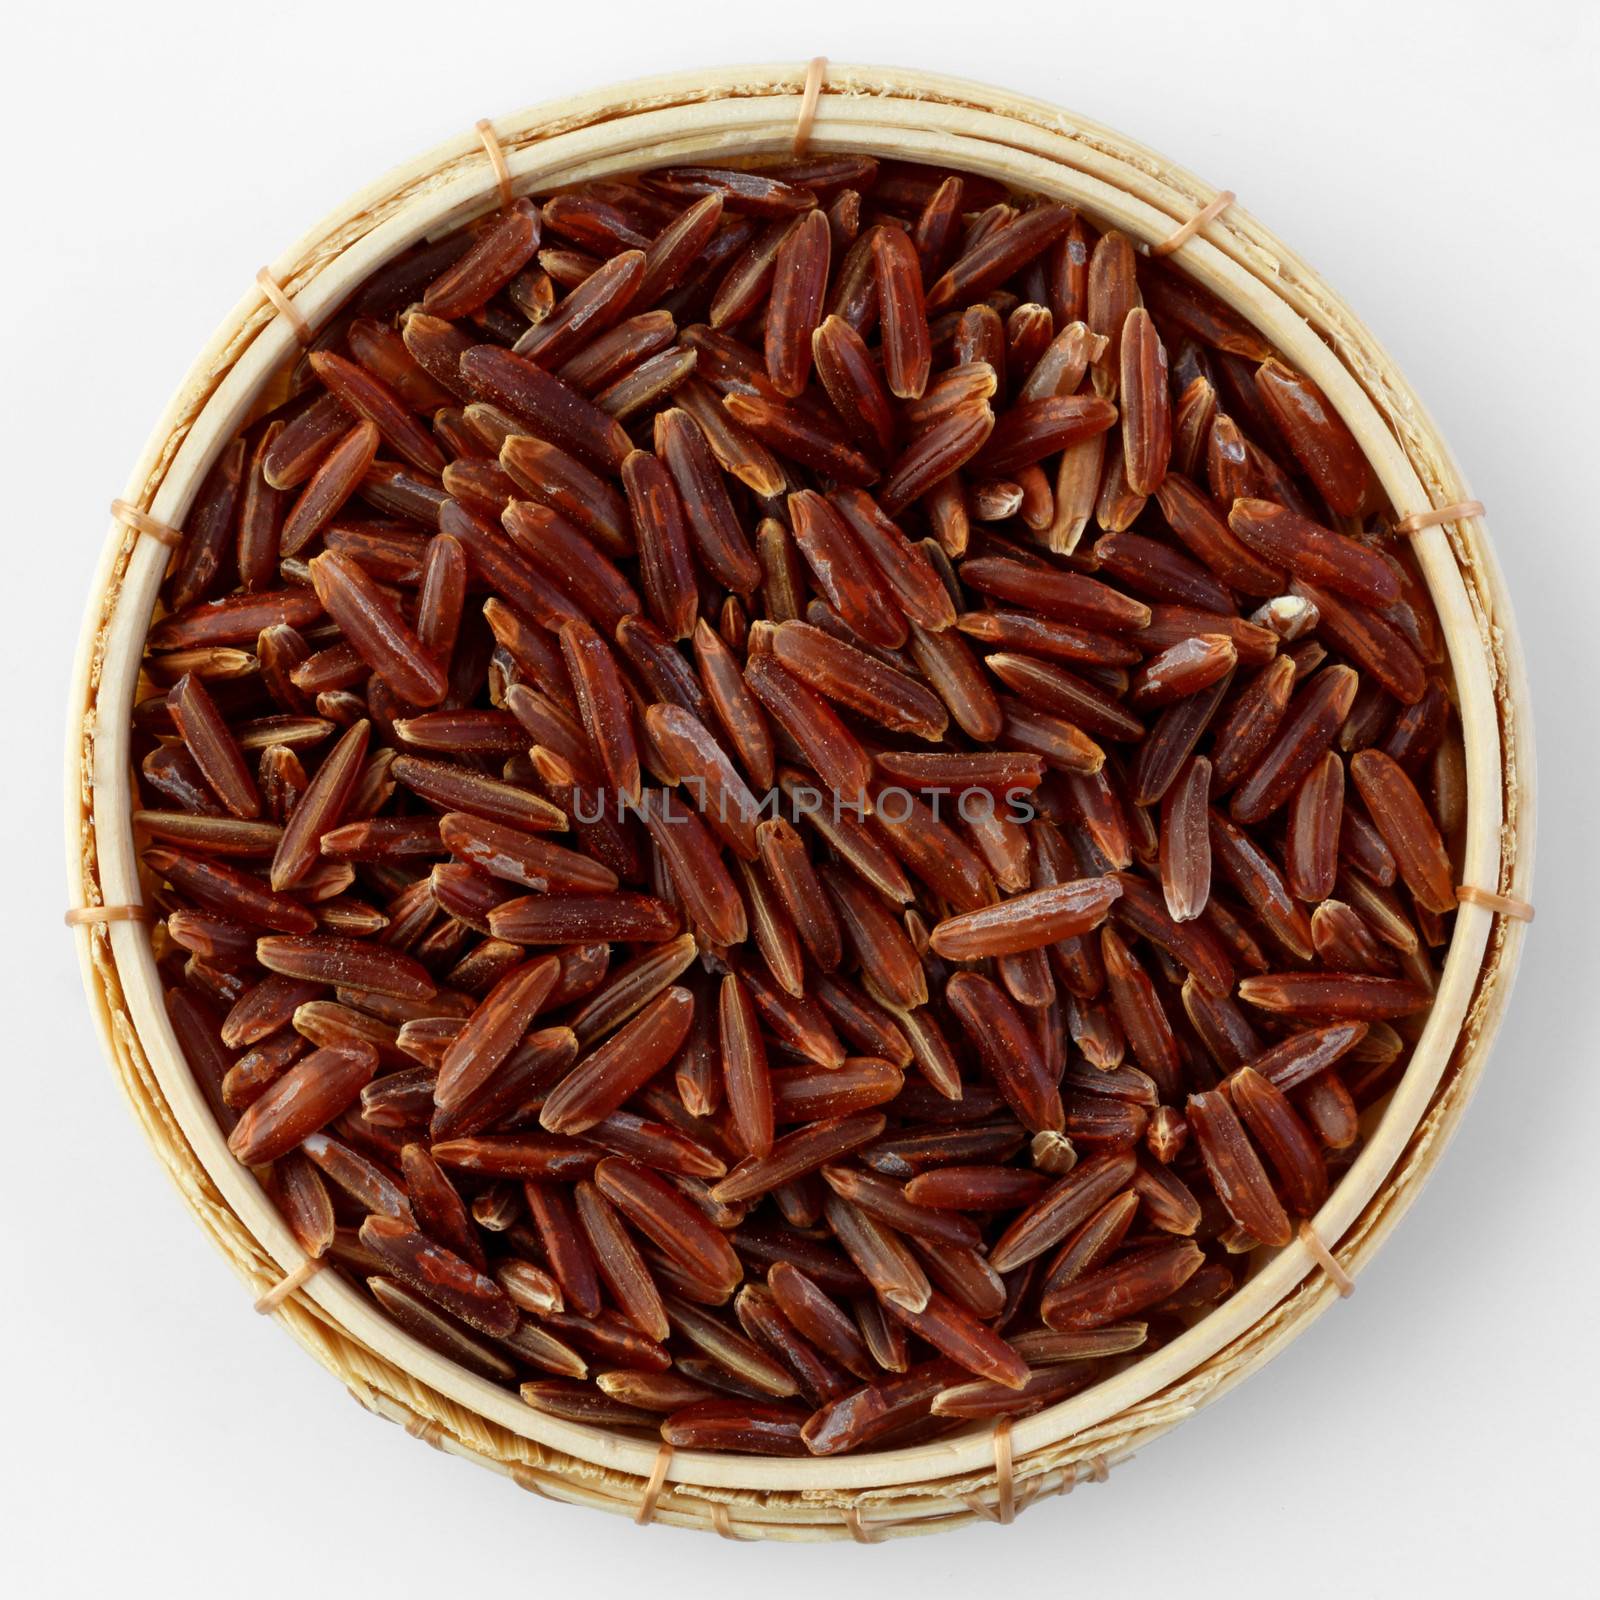 Thai brown jasmine rice in bamboo basket isolated on white